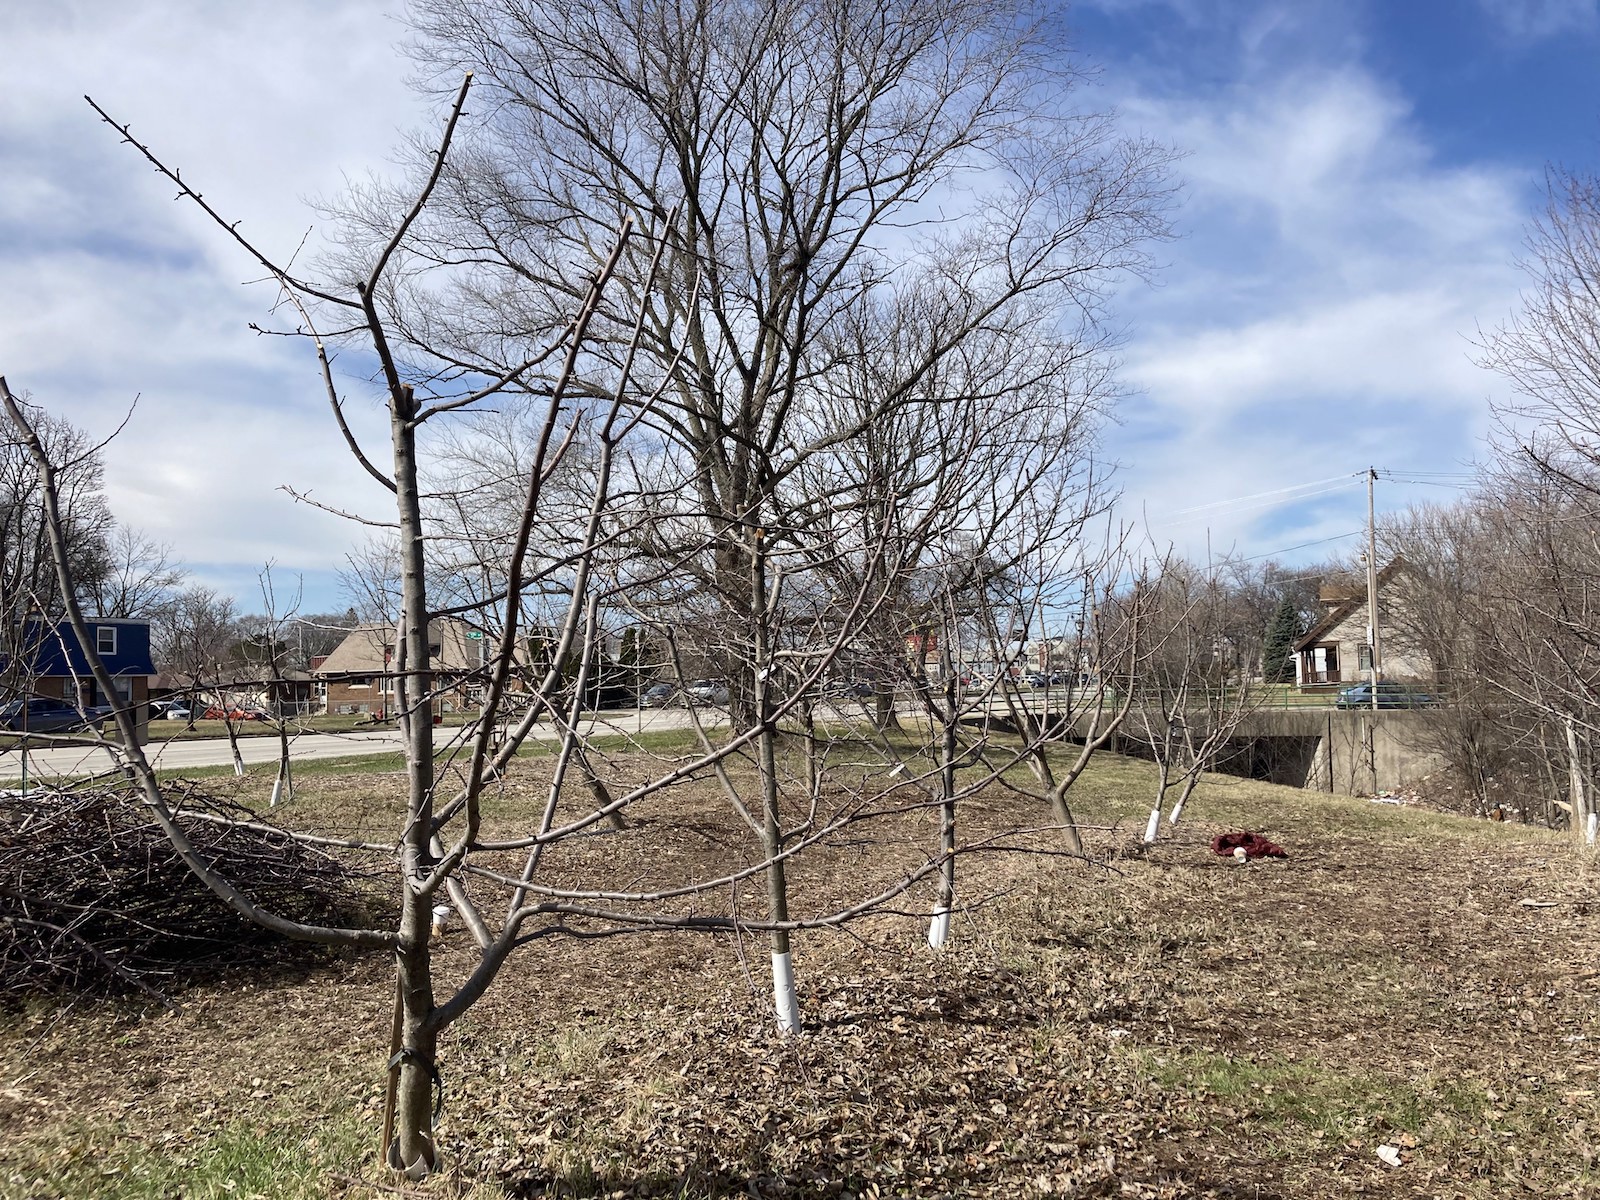 bare trees with white markings on their base grow near a road with houses